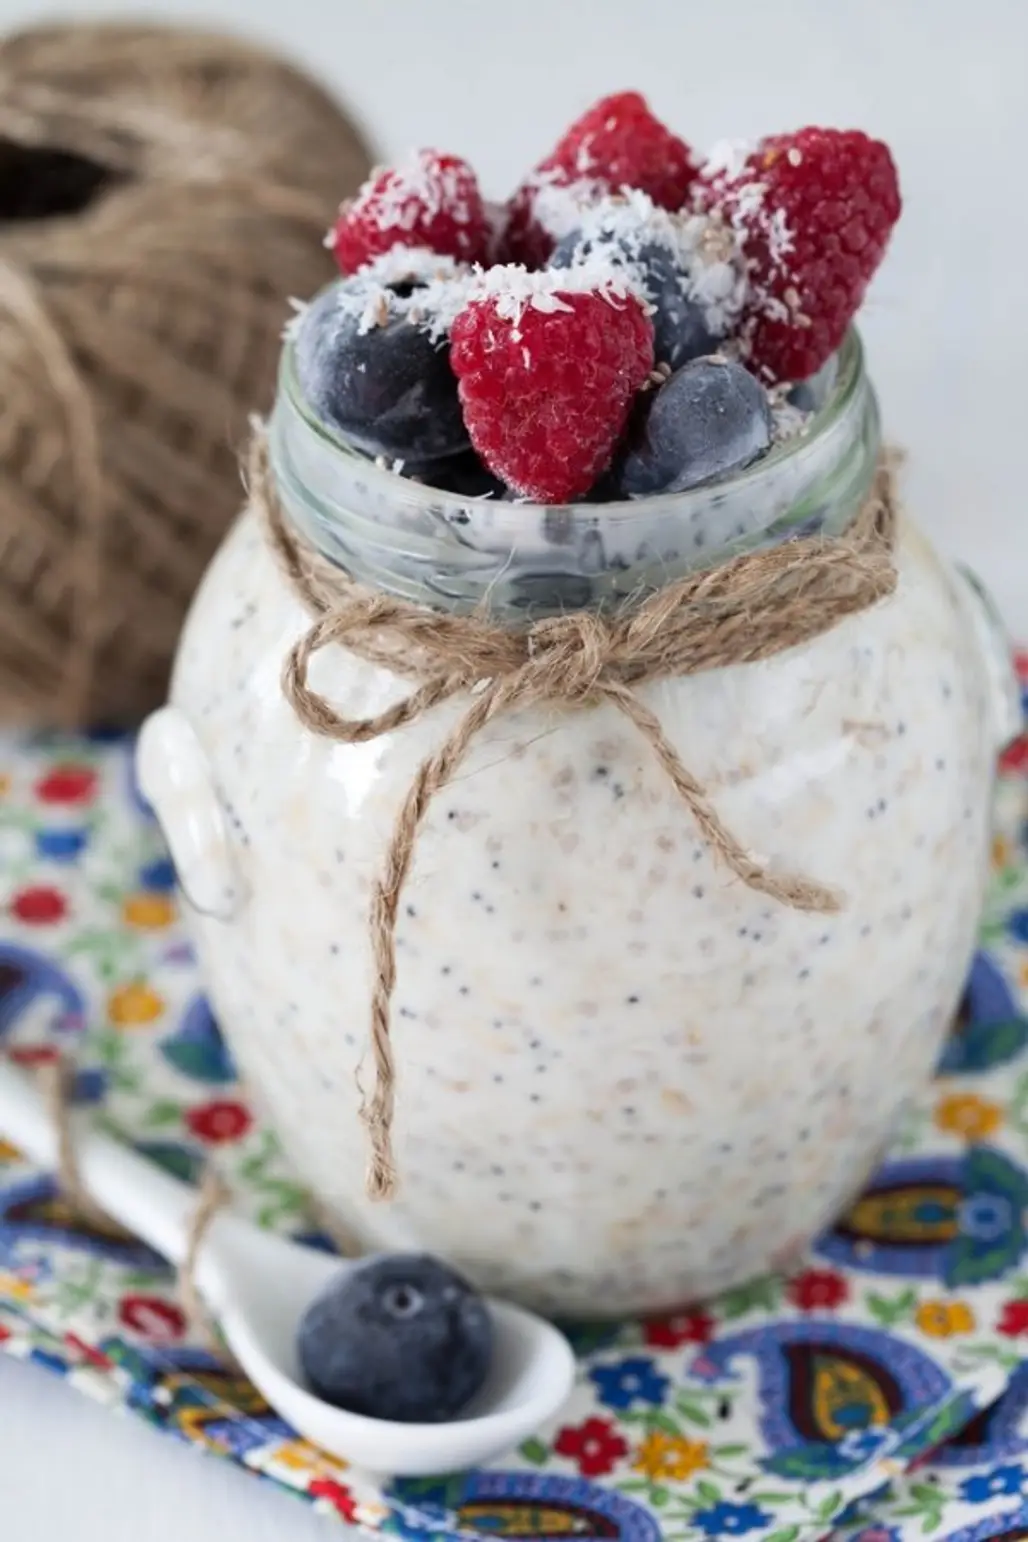 Make Overnight Oats for Snacks and Breakfasts